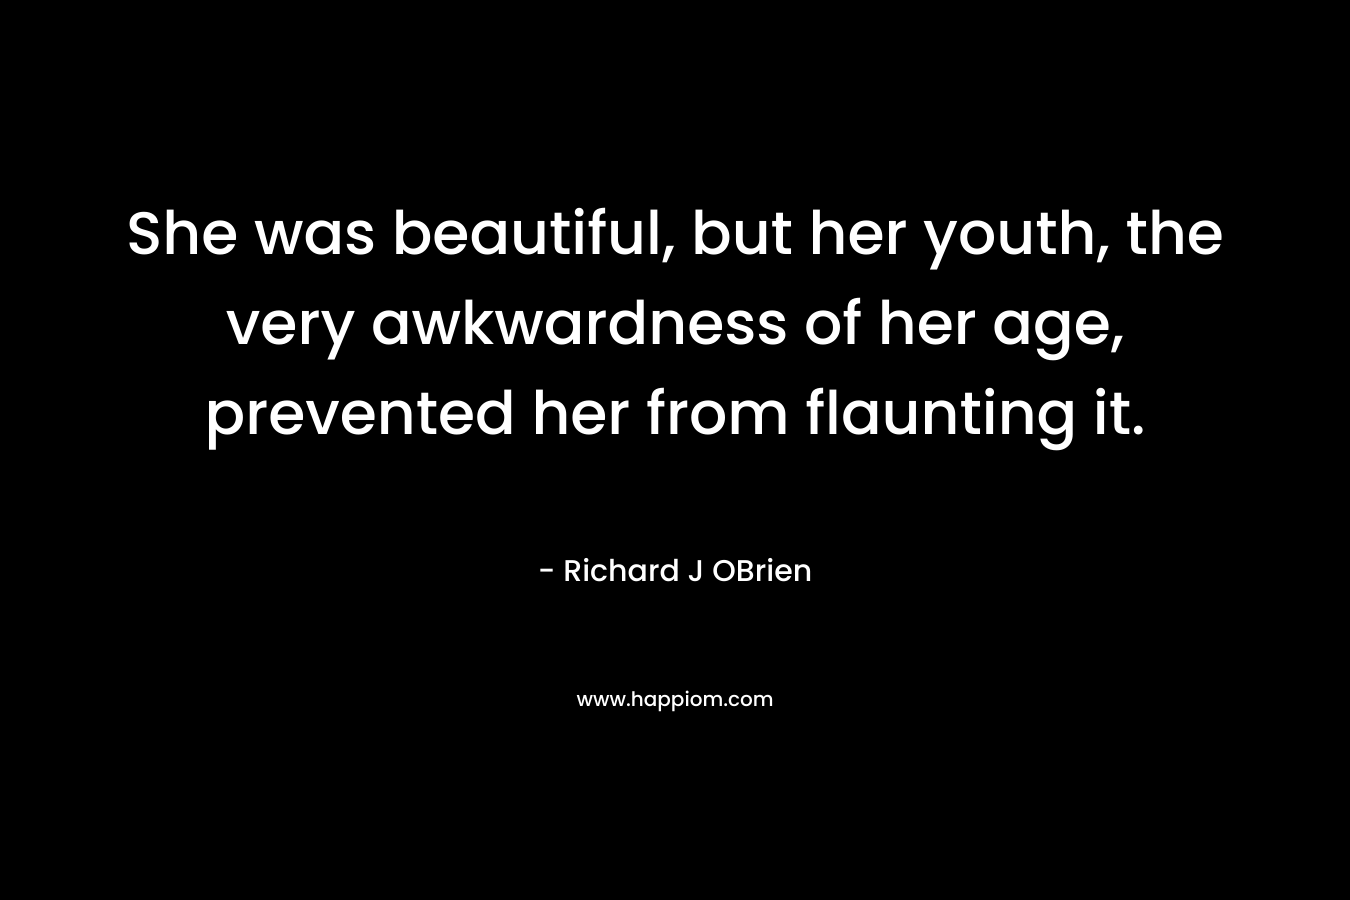 She was beautiful, but her youth, the very awkwardness of her age, prevented her from flaunting it.